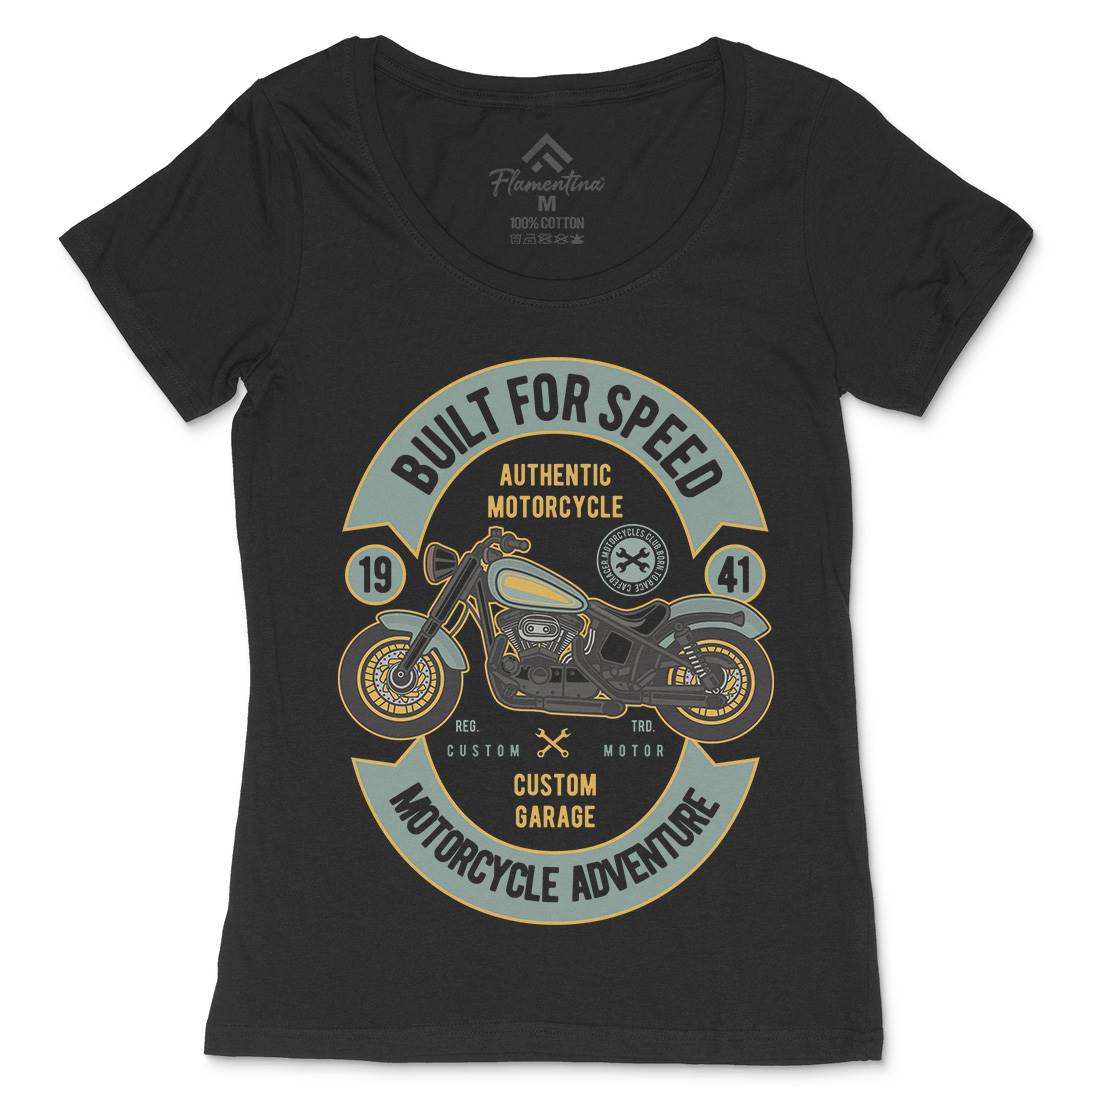 Built For Speed Womens Scoop Neck T-Shirt Motorcycles D512